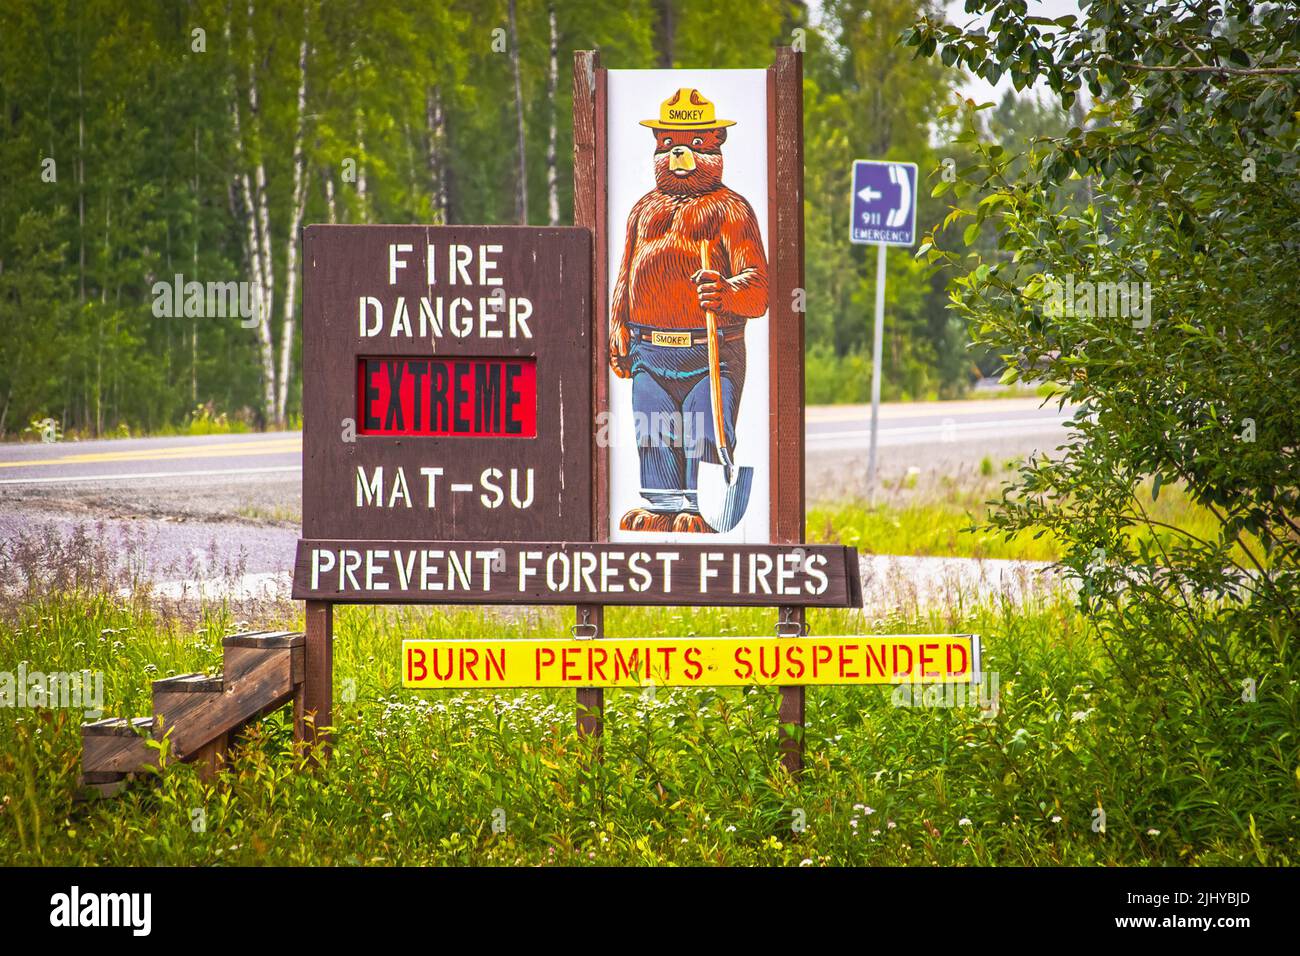 2022 06 26  Mat-Su Alaska USA - Smokey Bear - Prevent Forest Fires sign beside Alaskan highway - Extreme Level - Burn Permits Suspended - wooden steps Stock Photo